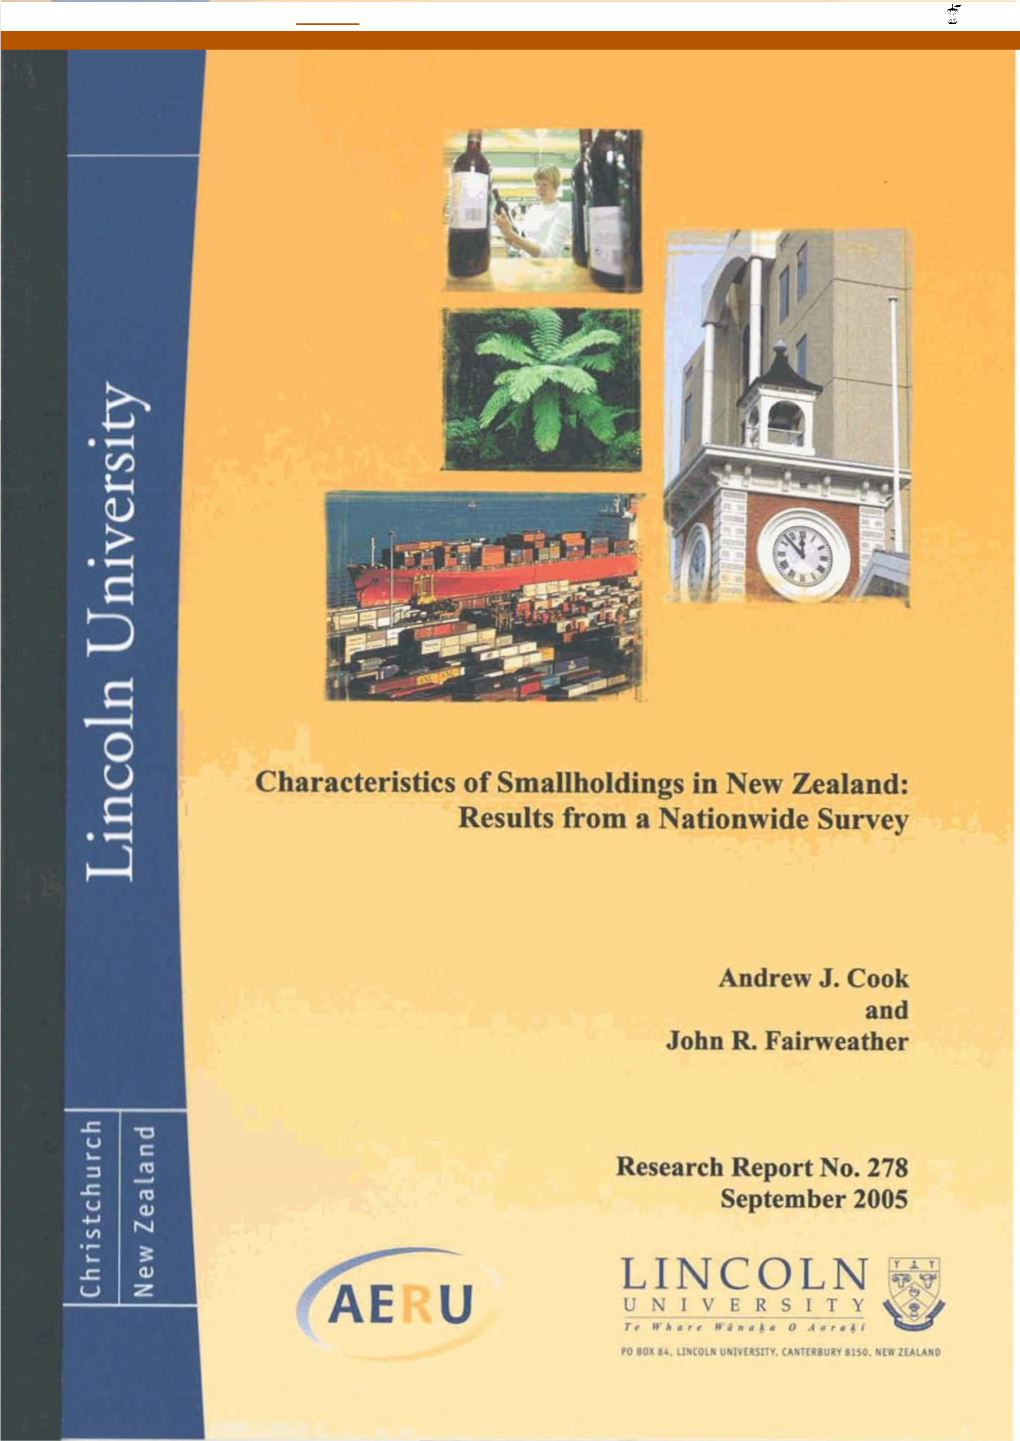 Characteristics of Smallholdings in New Zealand: Results from a Nationwide Survey